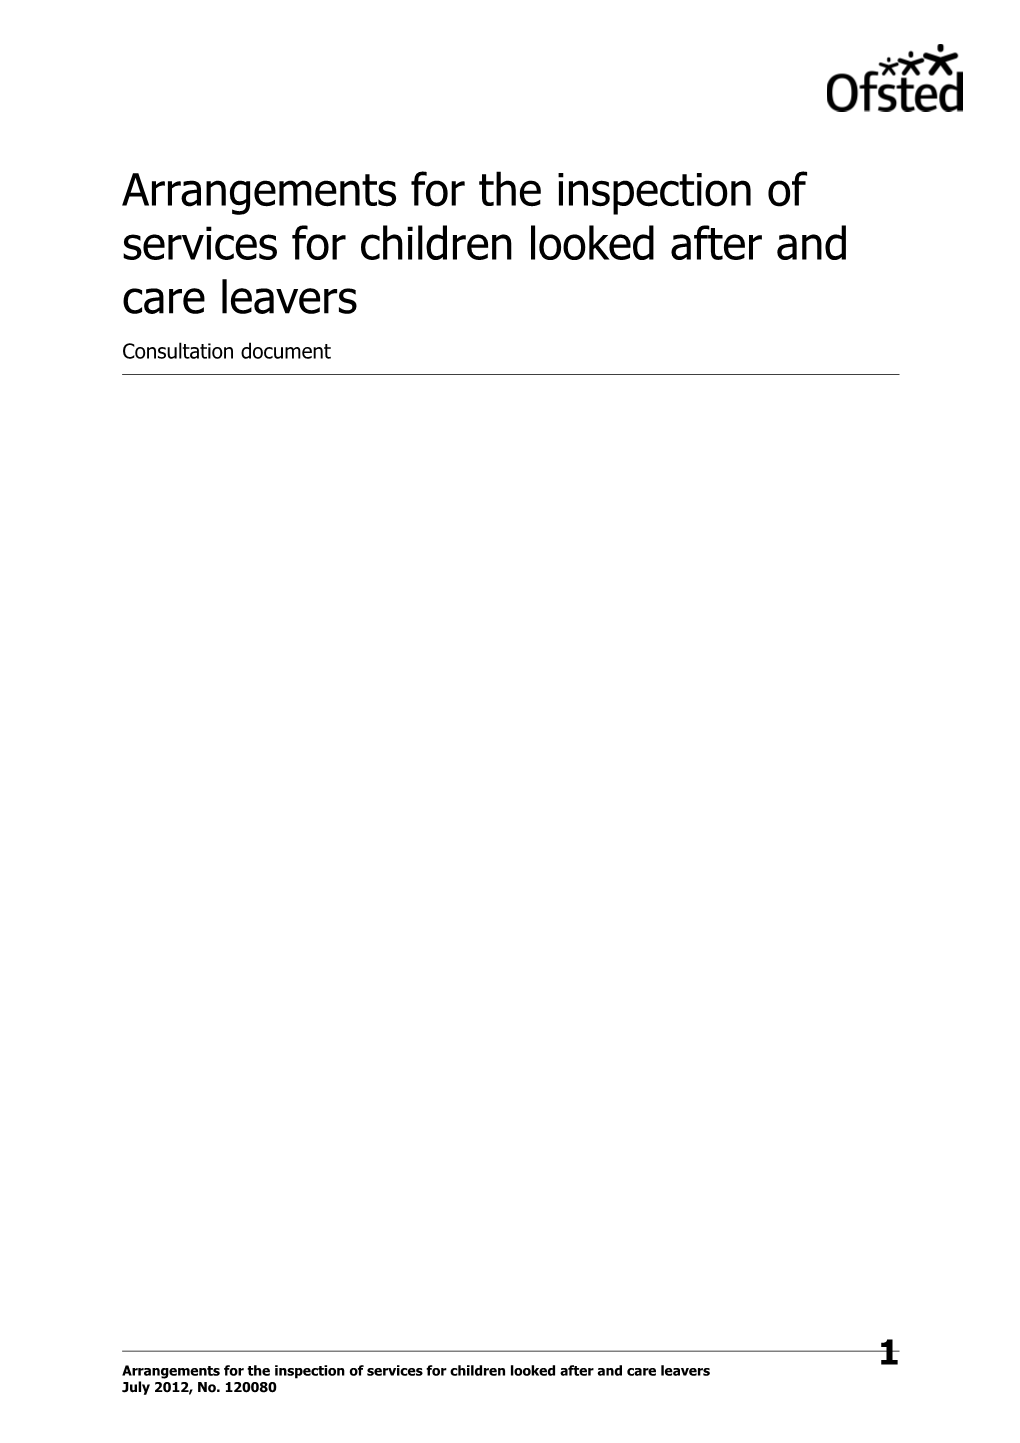 Children Looked After Consultation Document